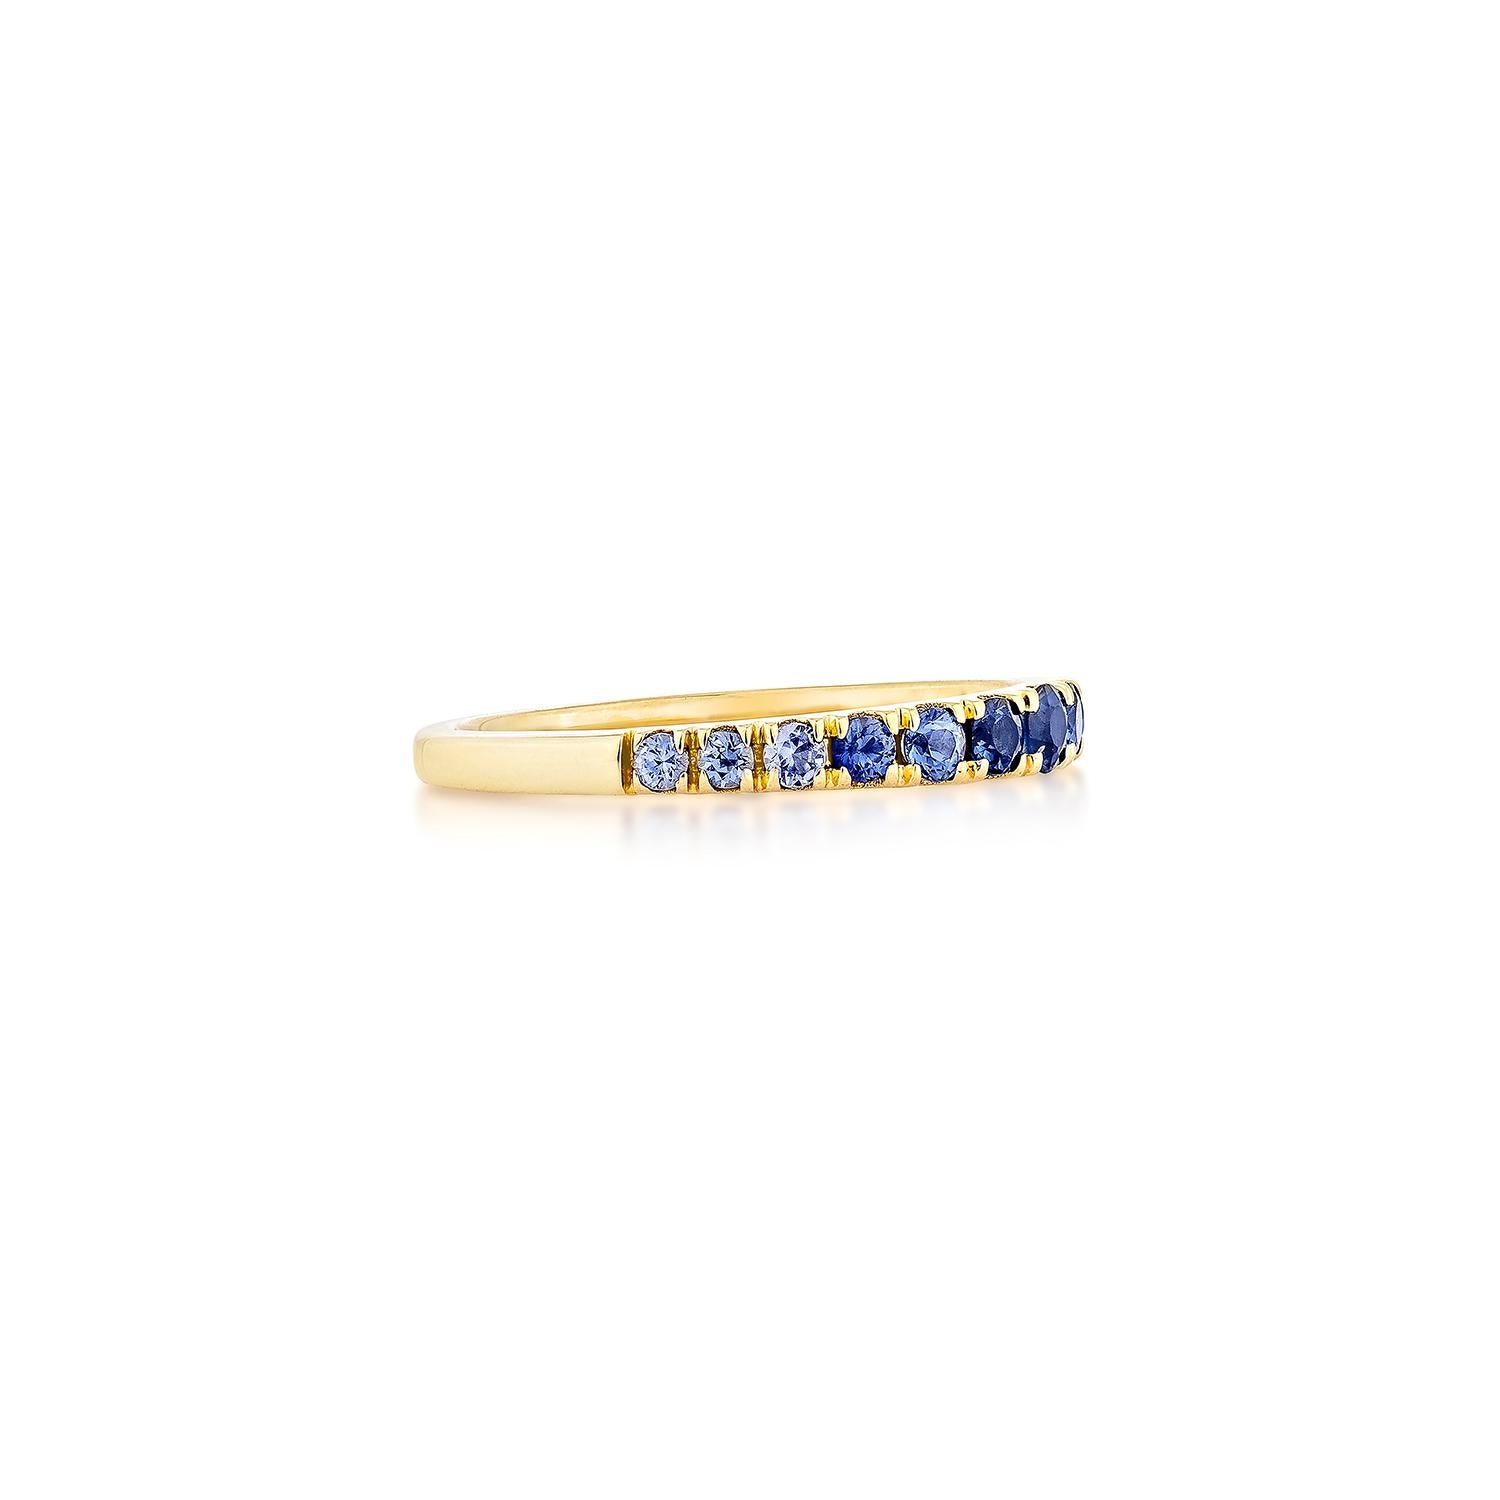 Elevate your style with our Blue Sapphire Stackable Ring, adorned with a dazzling blue sapphire nestled in 14Karat Yellow Gold. Delicate yet captivating, this ring adds a touch of elegance to any look, whether worn alone or stacked with other